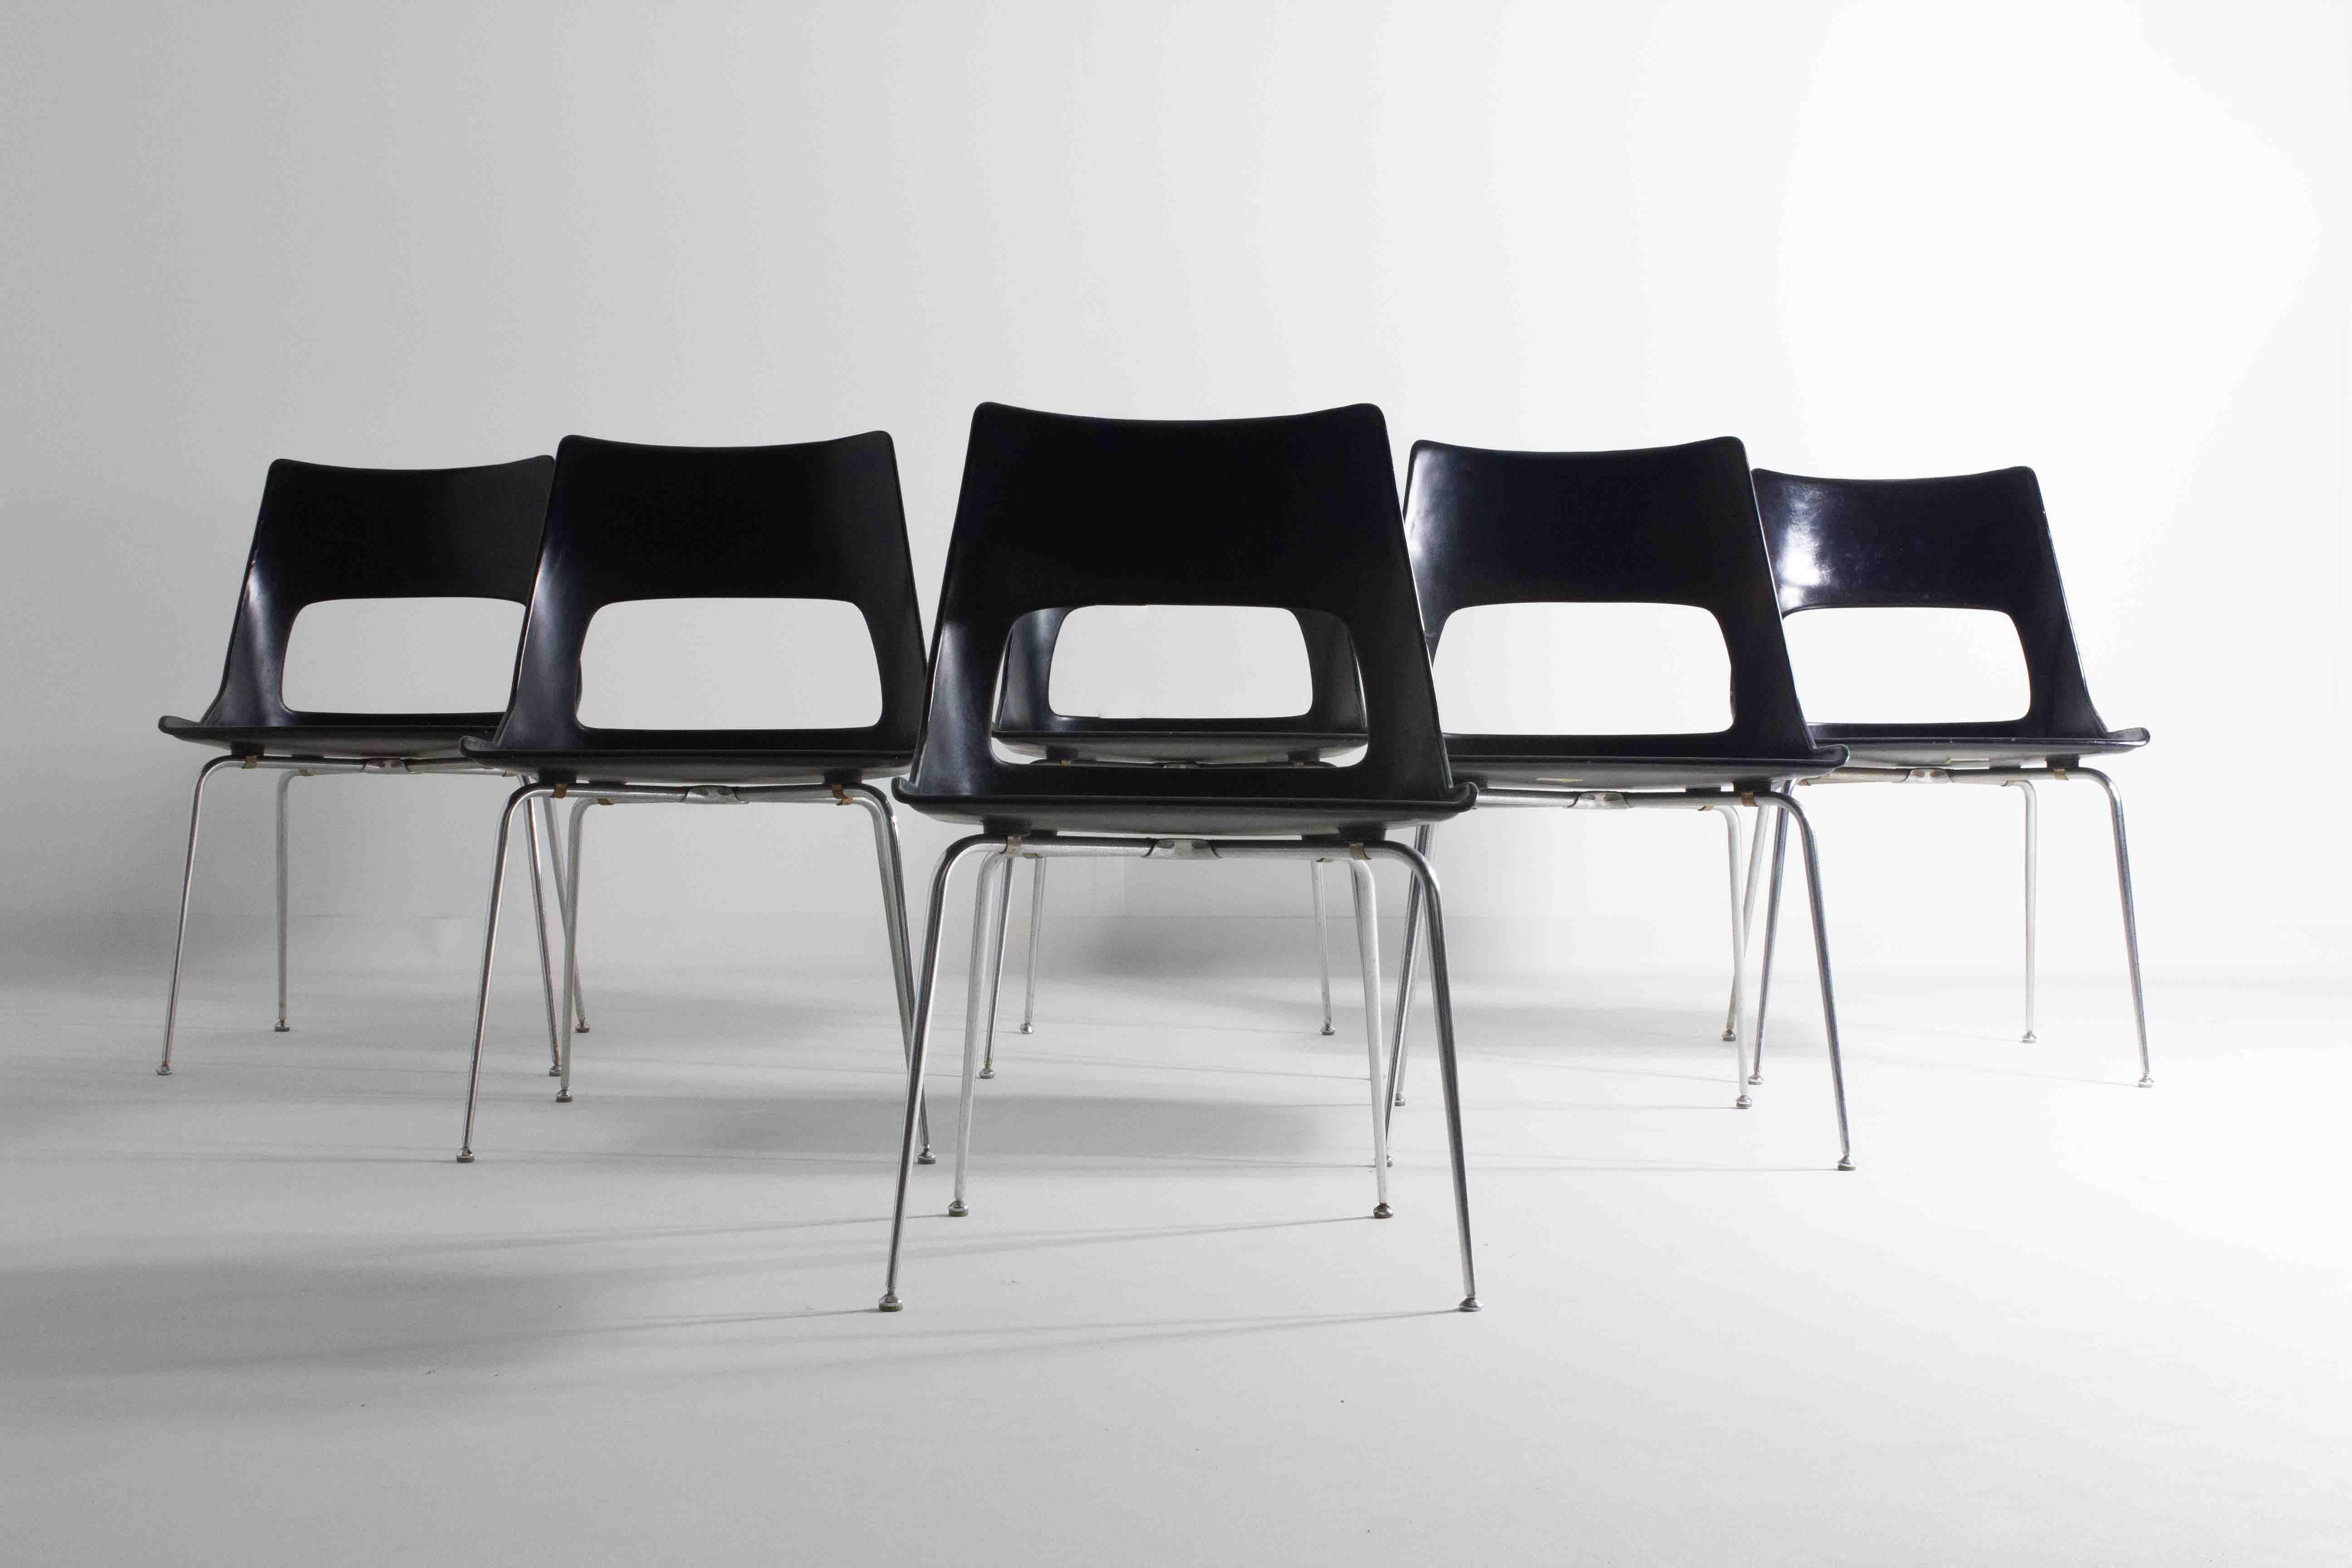 Introducing a remarkable set of six mid-century chairs designed by Kay Korbing in 1956 for Fibrex Danmark. These chairs feature a molded plastic shell that remains in its original condition, preserving the authenticity and charm of mid-century